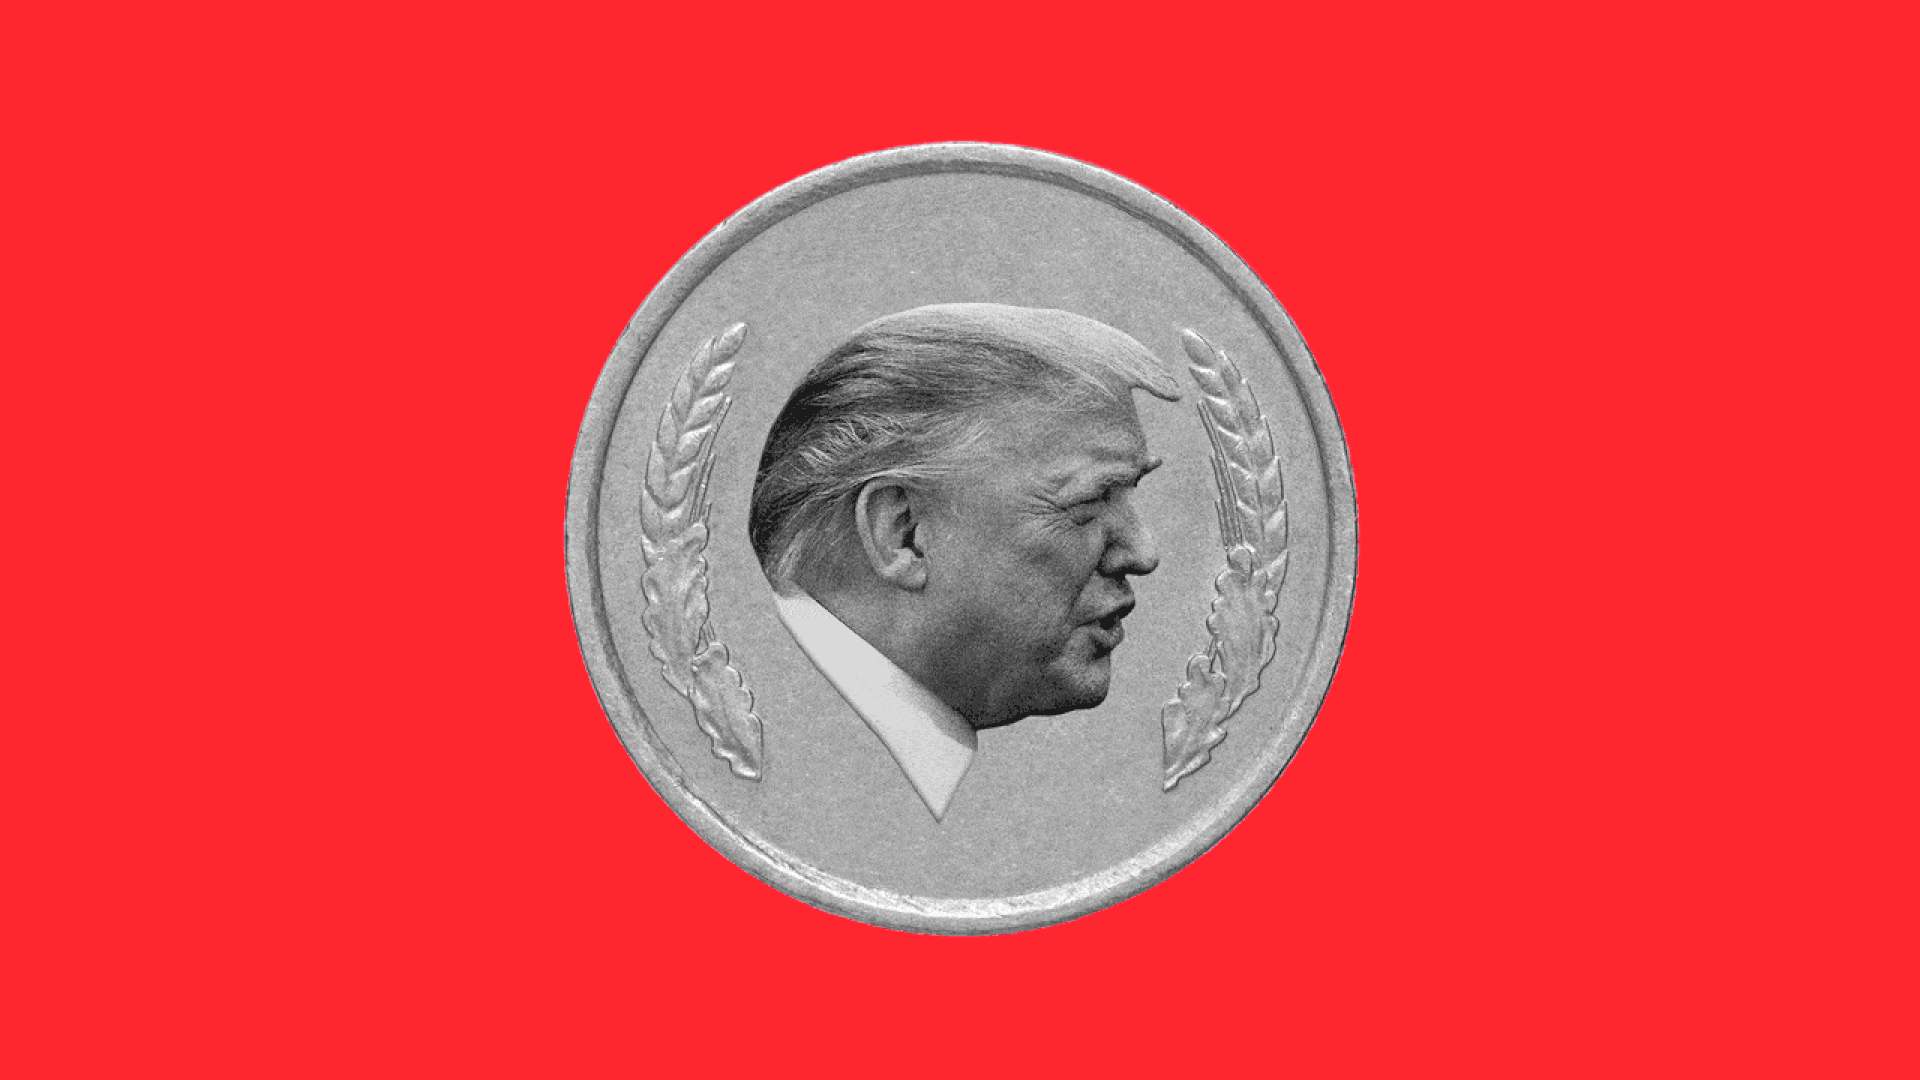 Animated illustration of a spinning coin with President Trump's profile on one side and John Bolton's on the other.